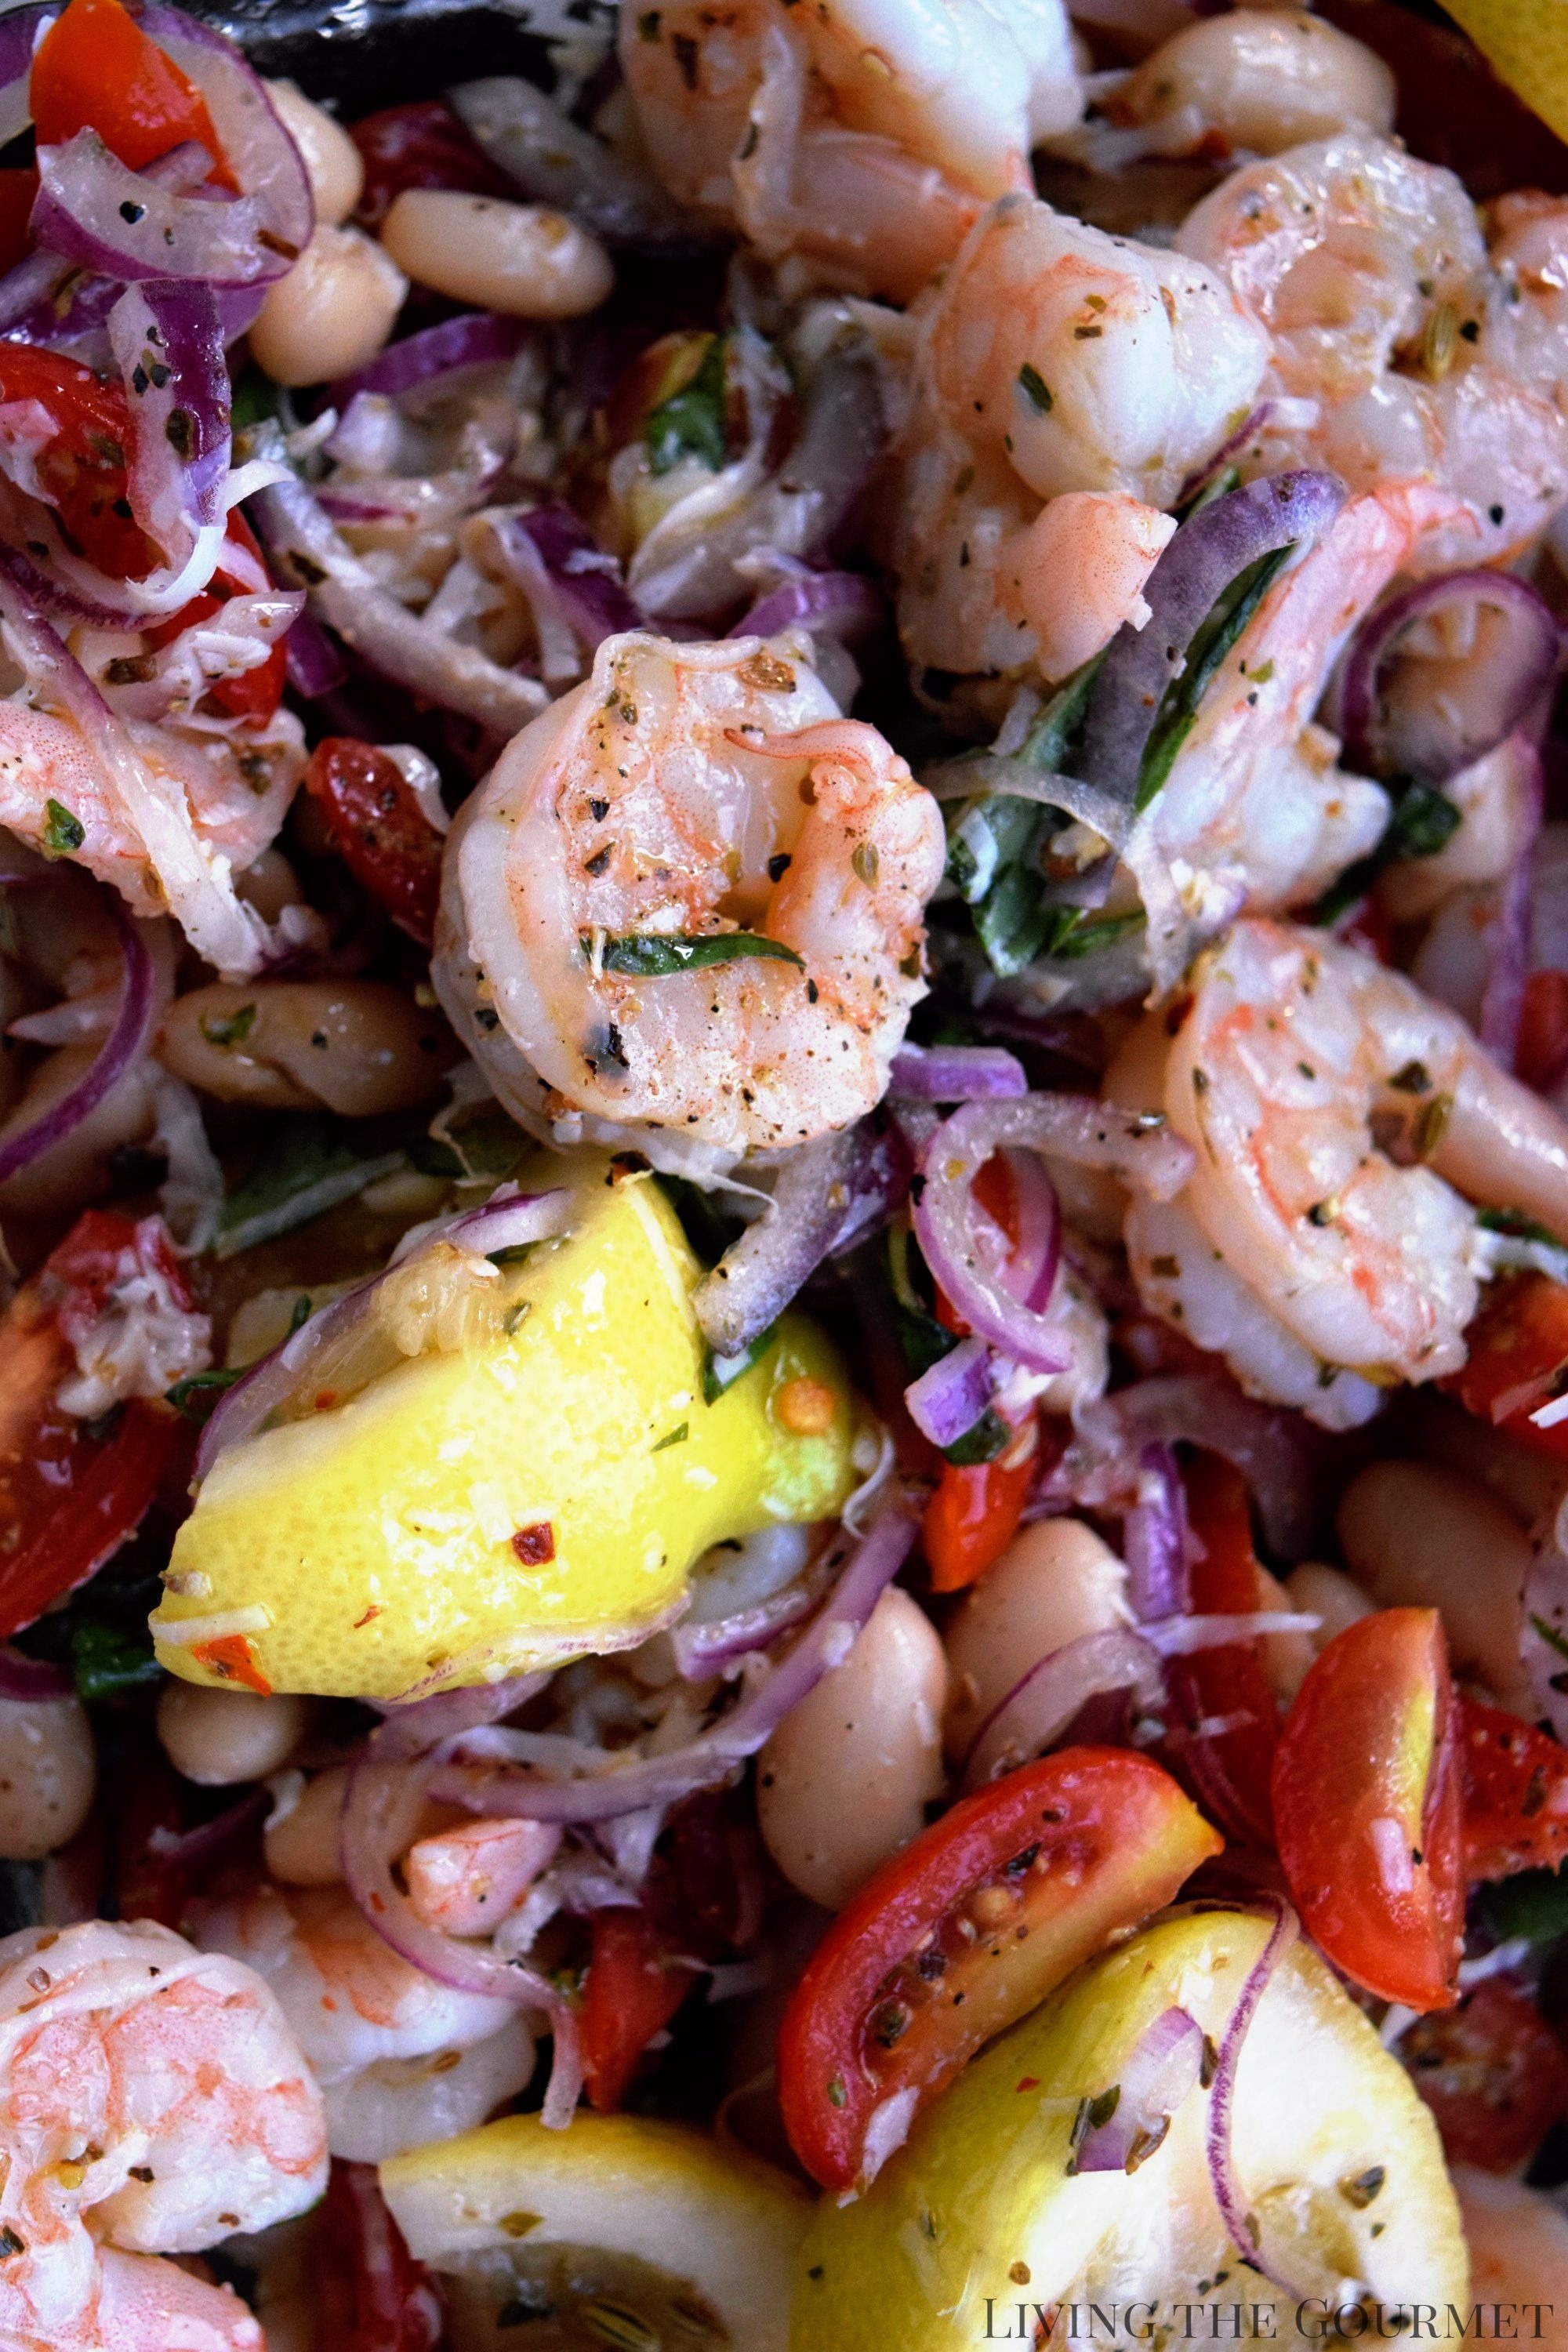 Living the Gourmet: This Summer Shrimp Salad is a cool, refreshing recipe for those hot summer nights that call for something easy!